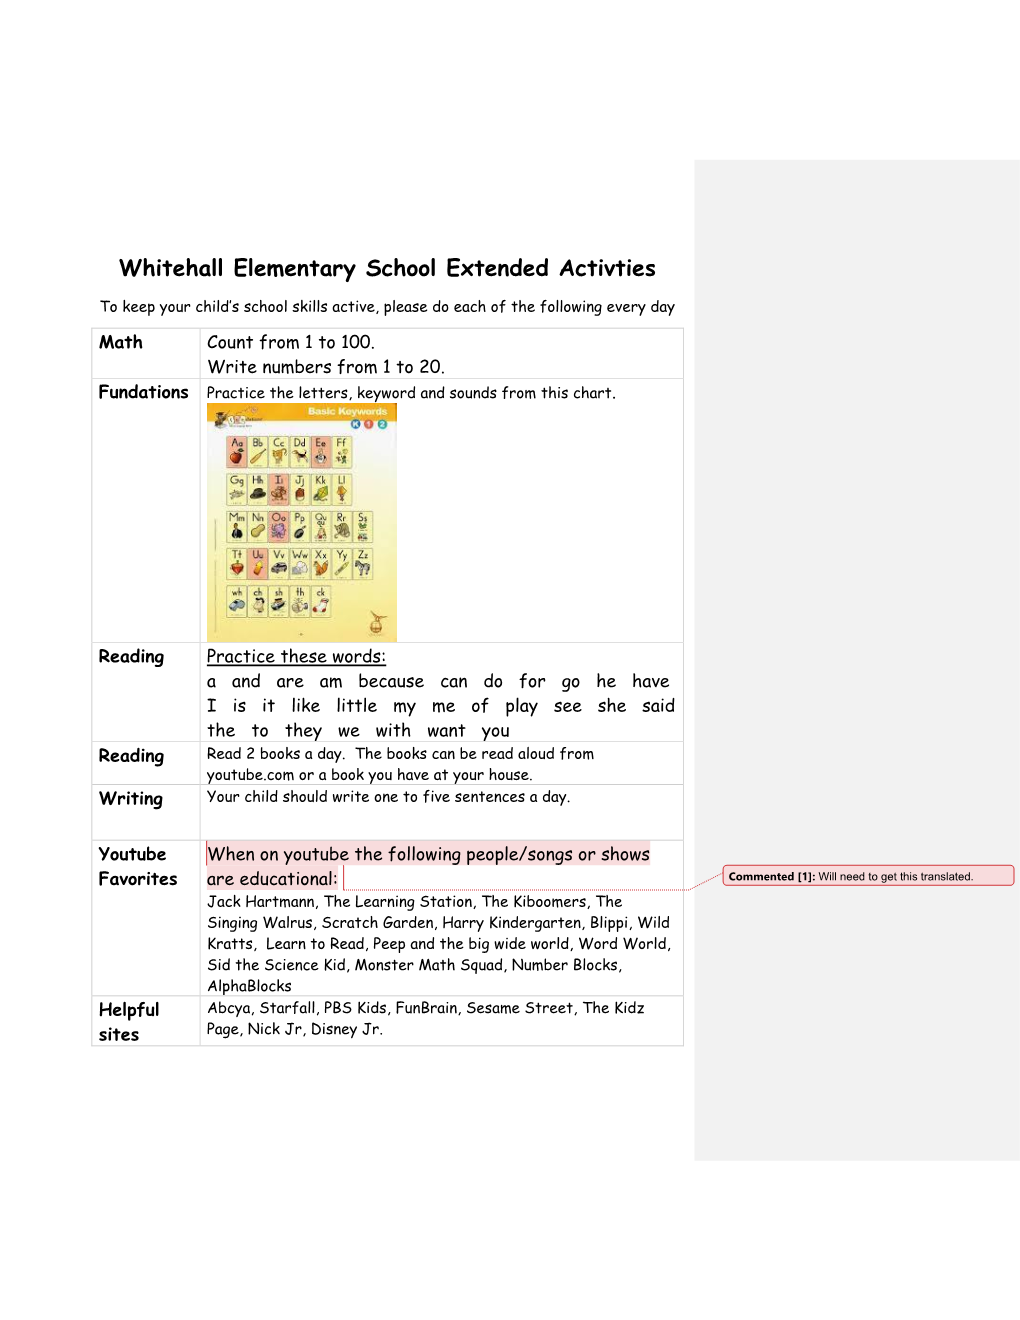 Whitehall Elementary School Extended Activties